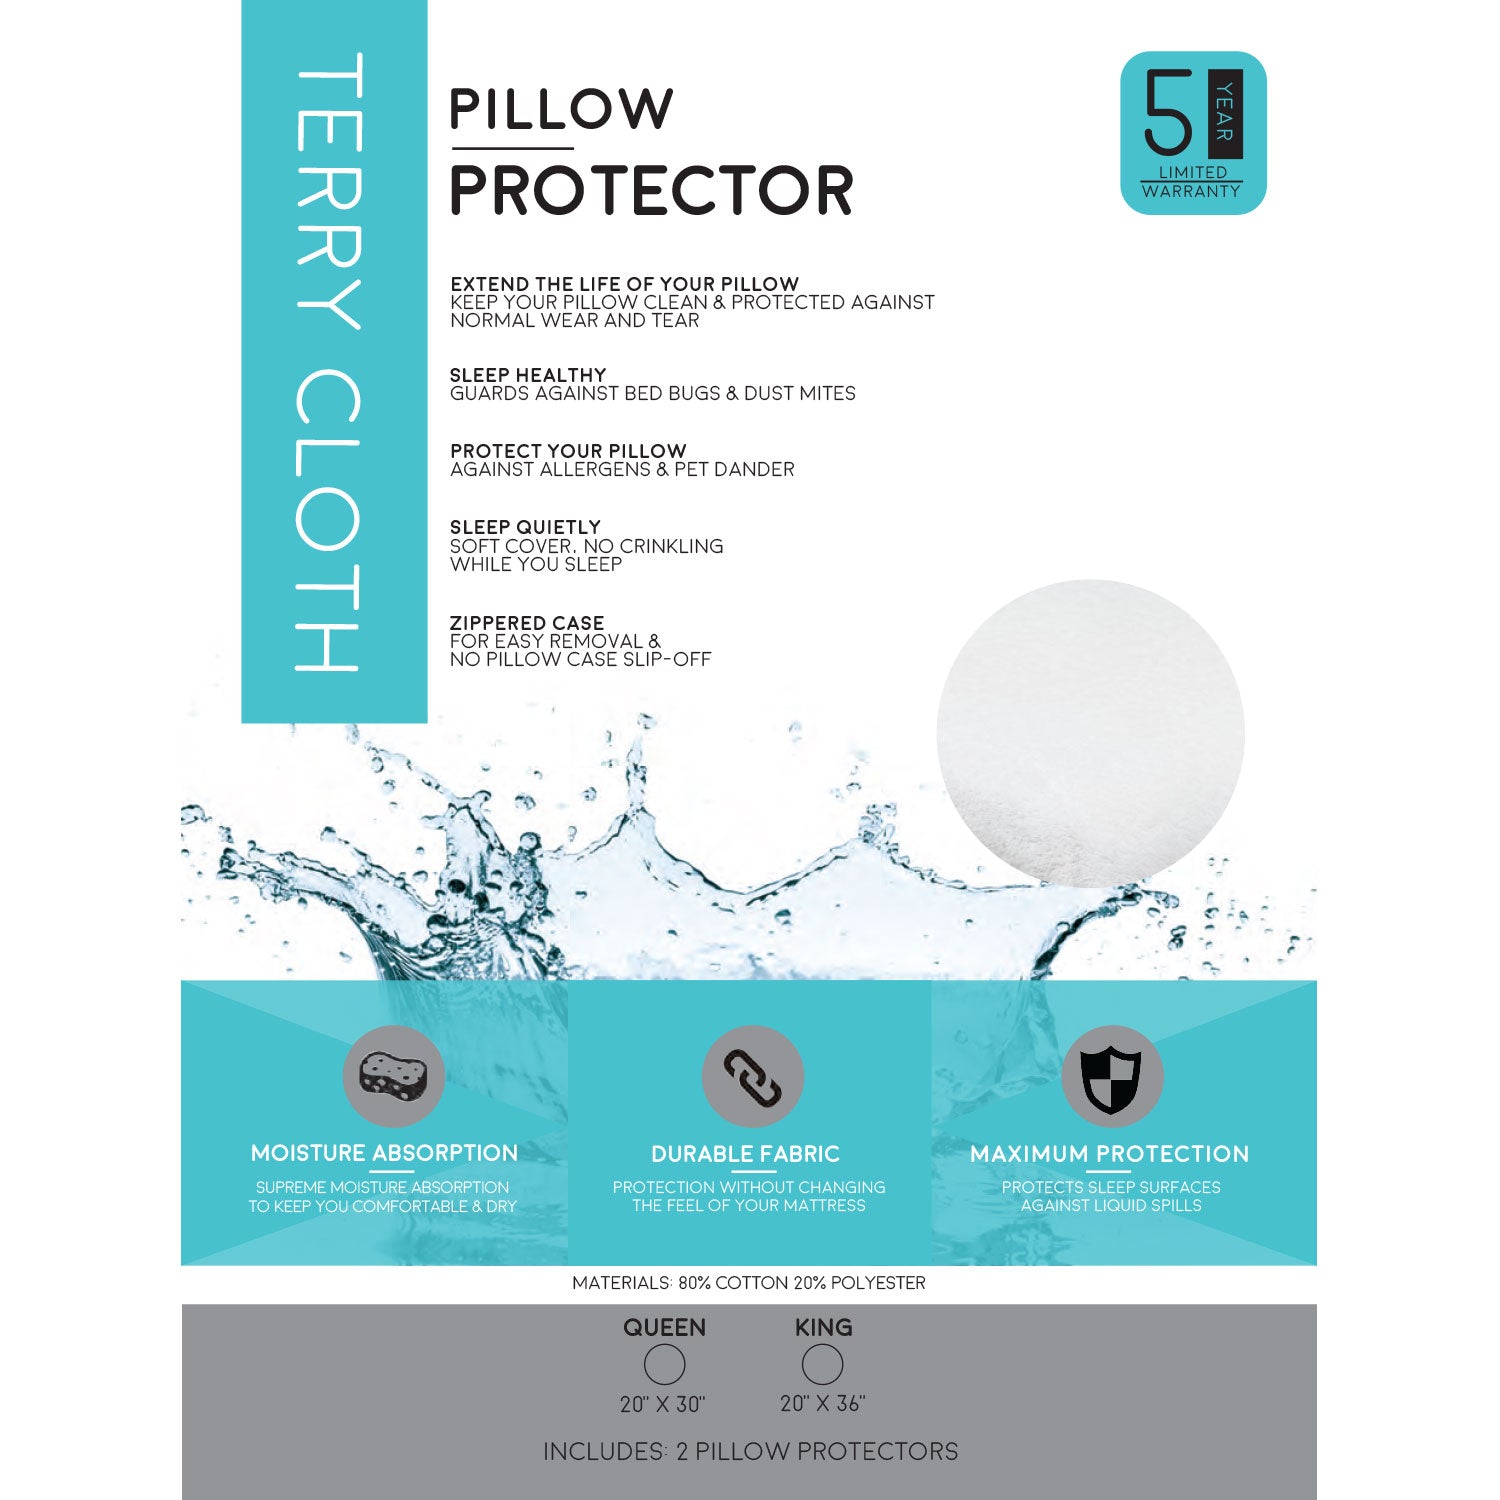 Soft Terry Cloth Pillow Protector - 100% Waterproof and Hypoallergenic Zipper Washable Cover - BlissfulNights.com